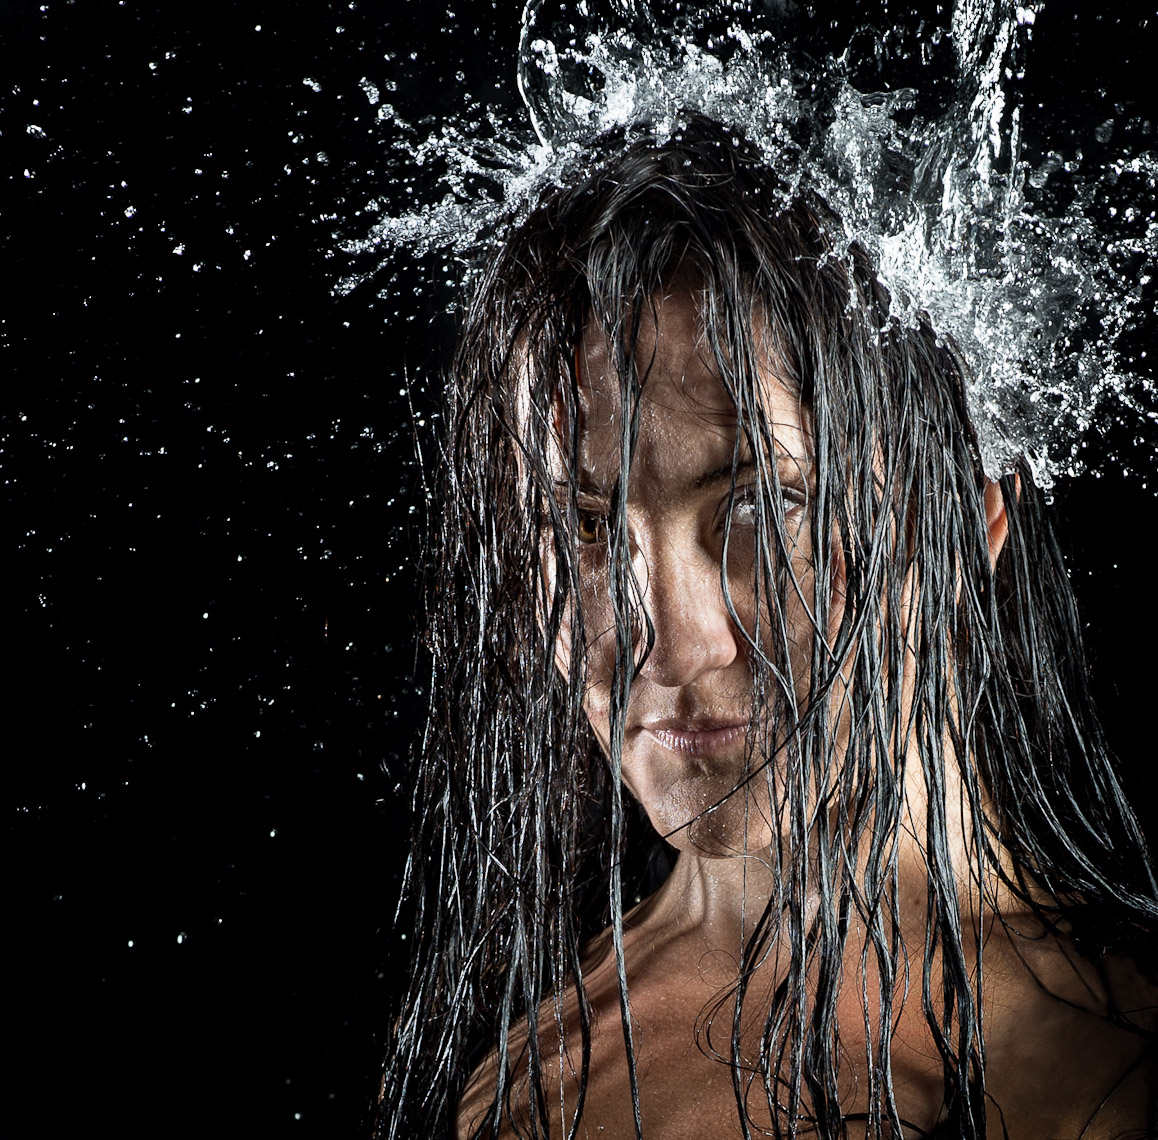 Kevin Steele - close up of water falling down woman